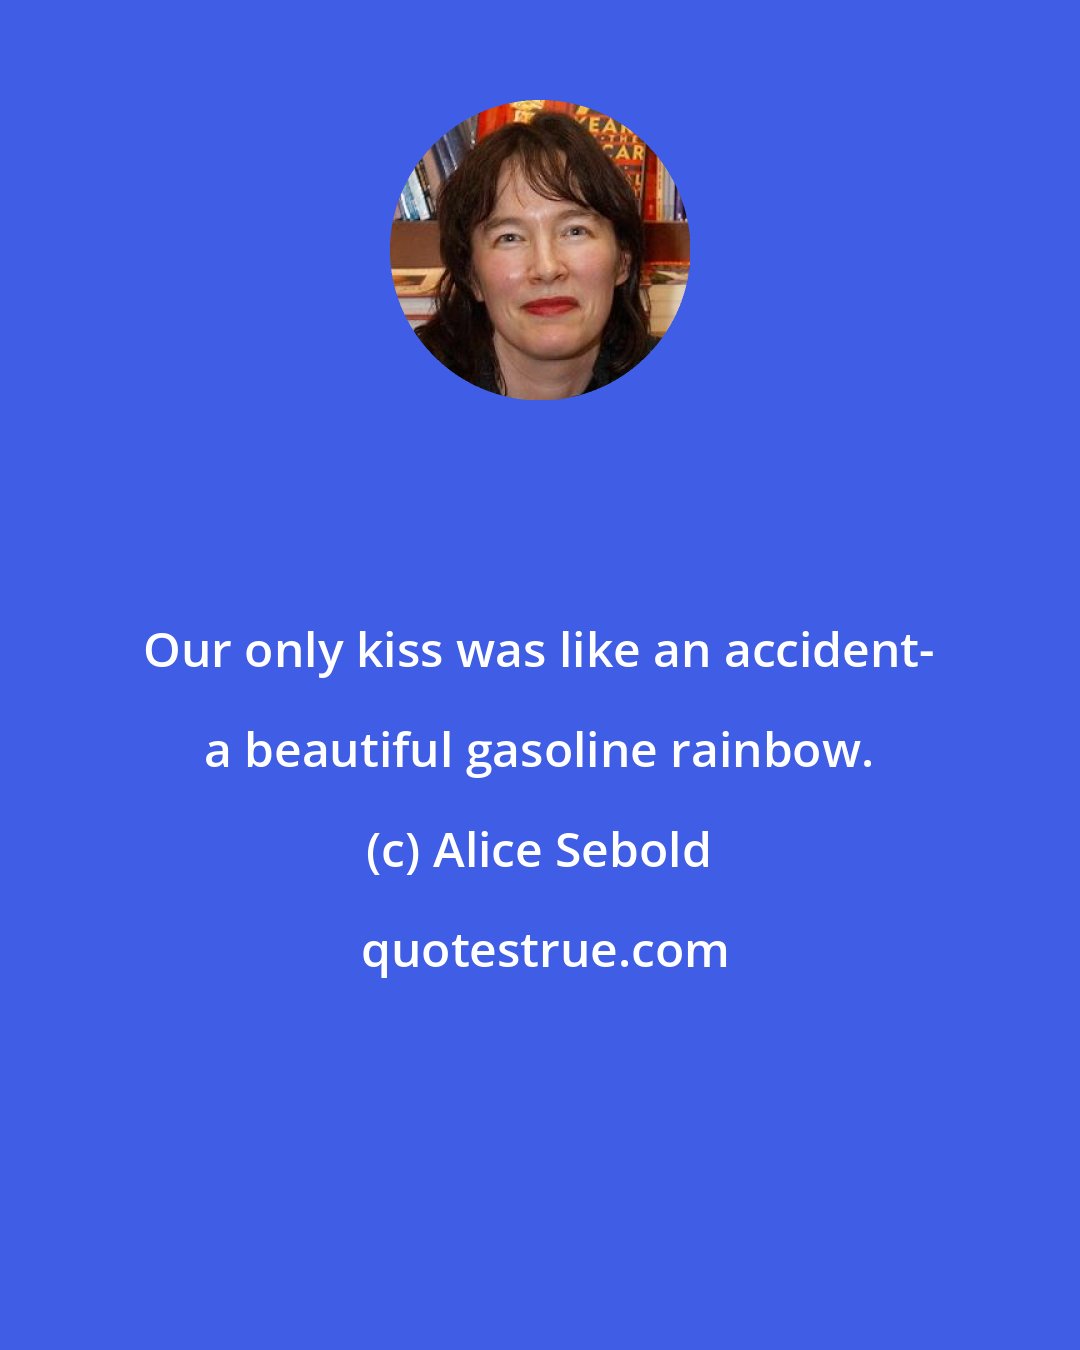 Alice Sebold: Our only kiss was like an accident- a beautiful gasoline rainbow.